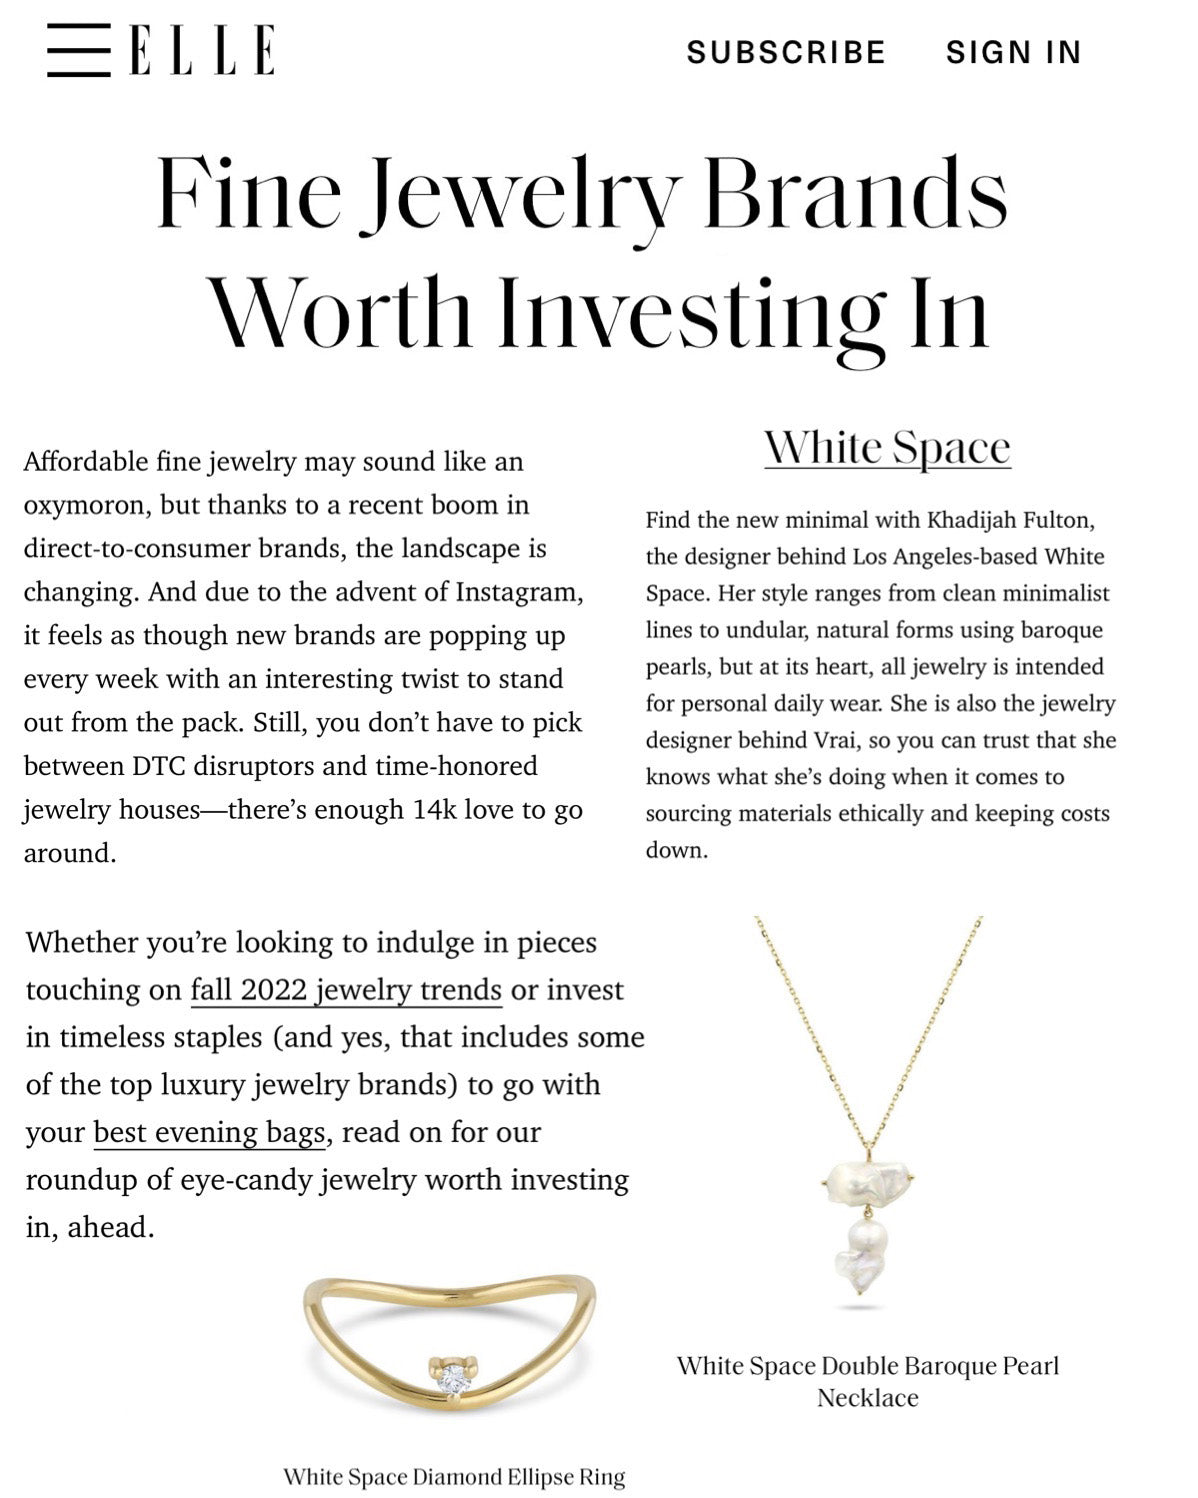 The luxury jewelry brands worth investing in